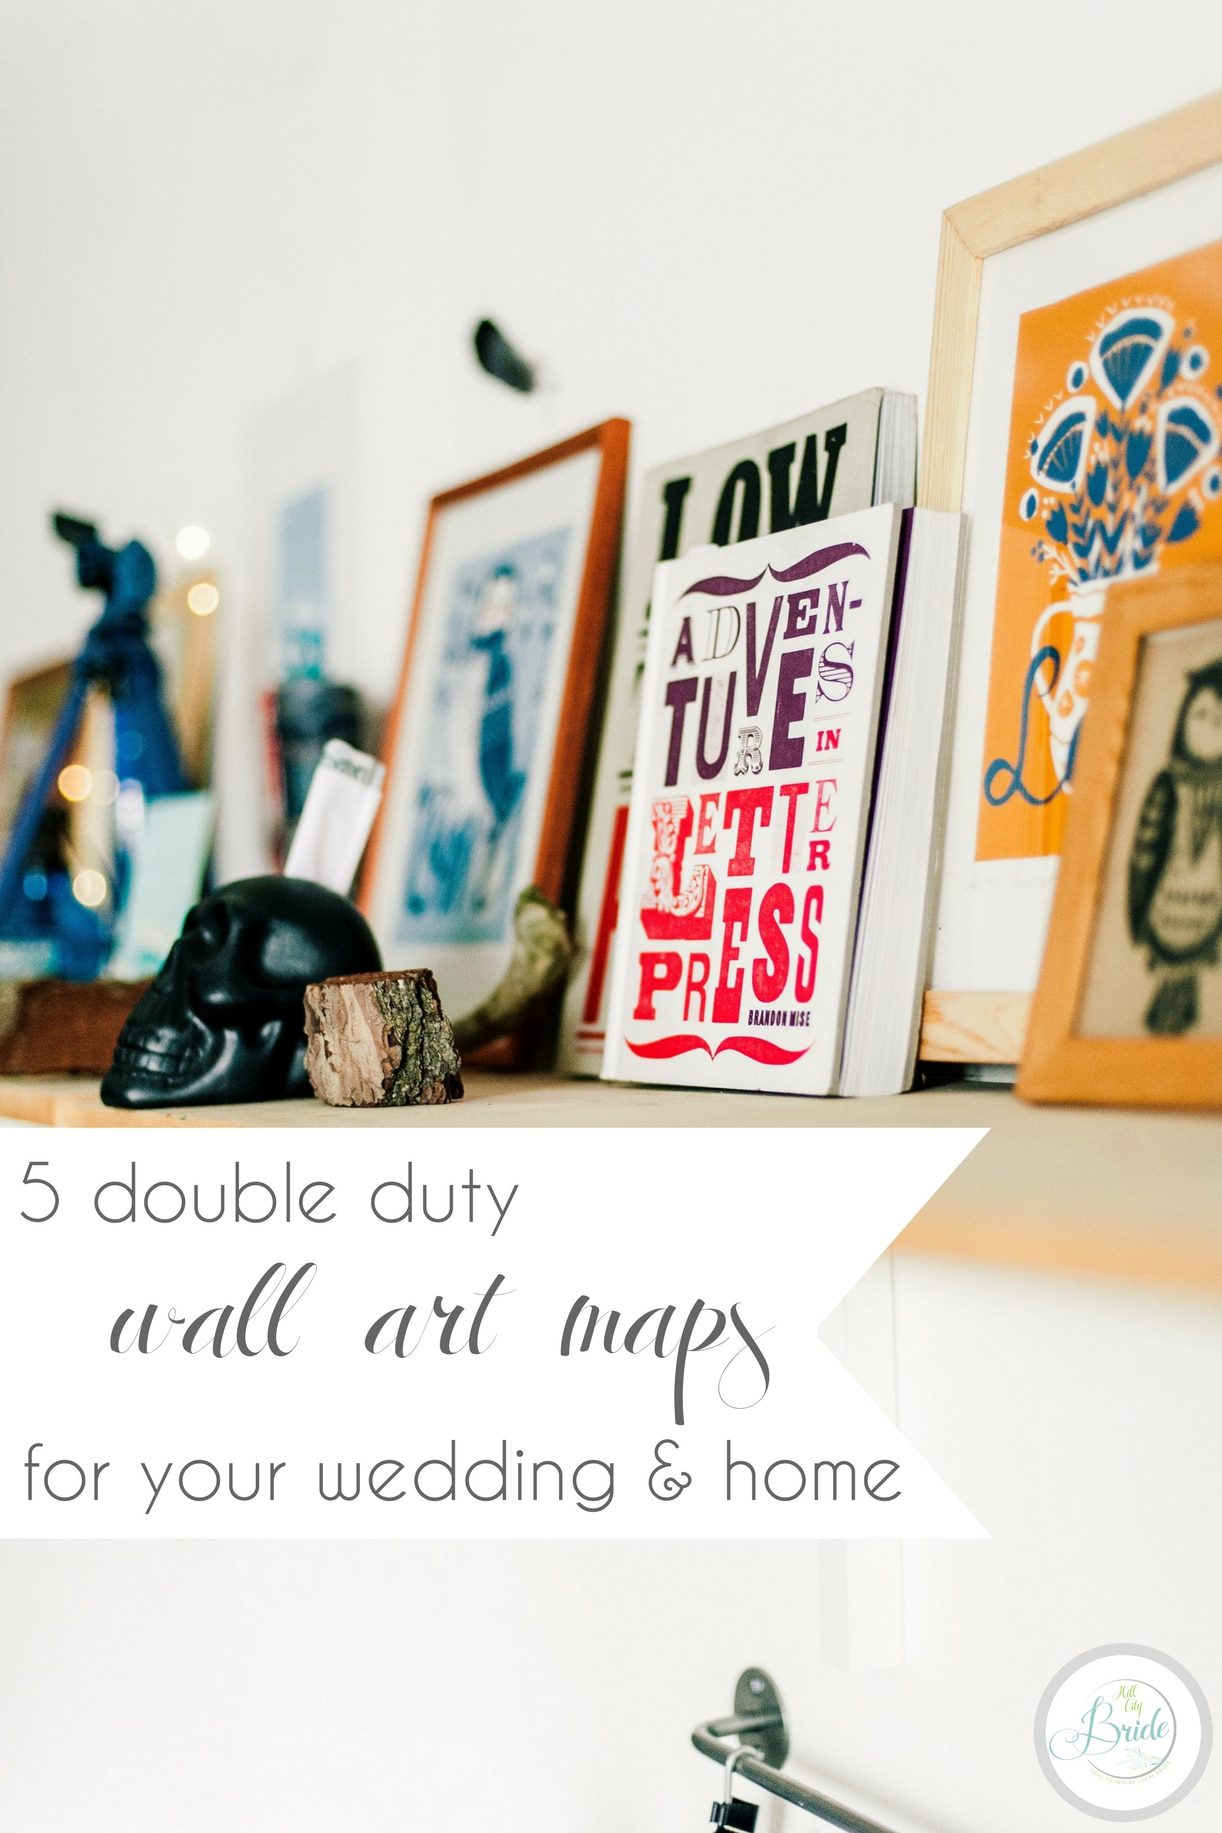 Wall Art Maps with Minted Gallery Walls | Hill City Bride Virginia Wedding Blog